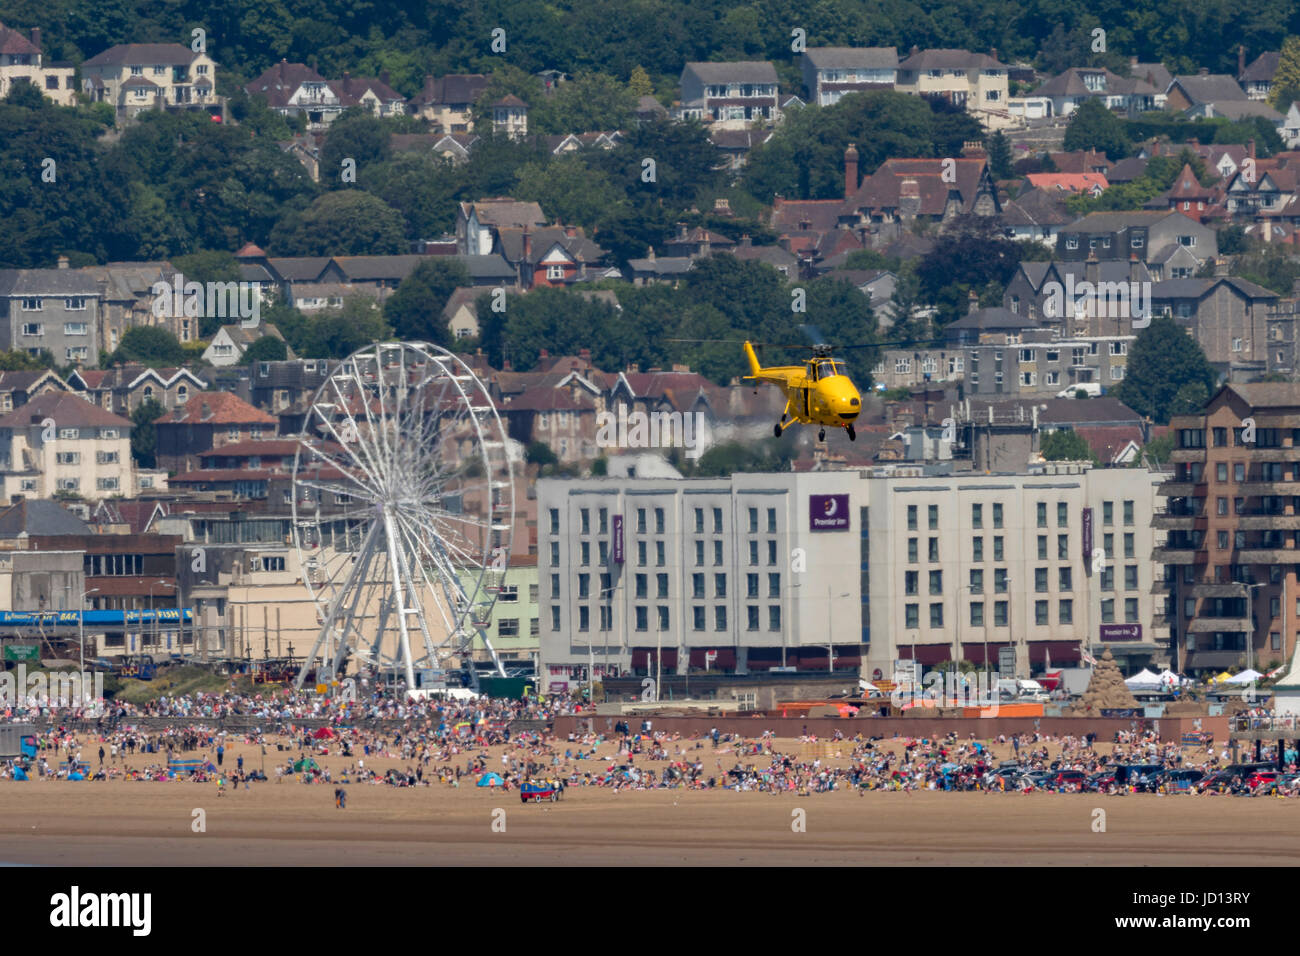 Hot weather in the UK, brought out large crowds for the Weston Air Festival at Weston-super-Mare, here the Whirlwind HAR Mark 10 on launch for display Credit: Bob Sharples/Alamy Live News Stock Photo